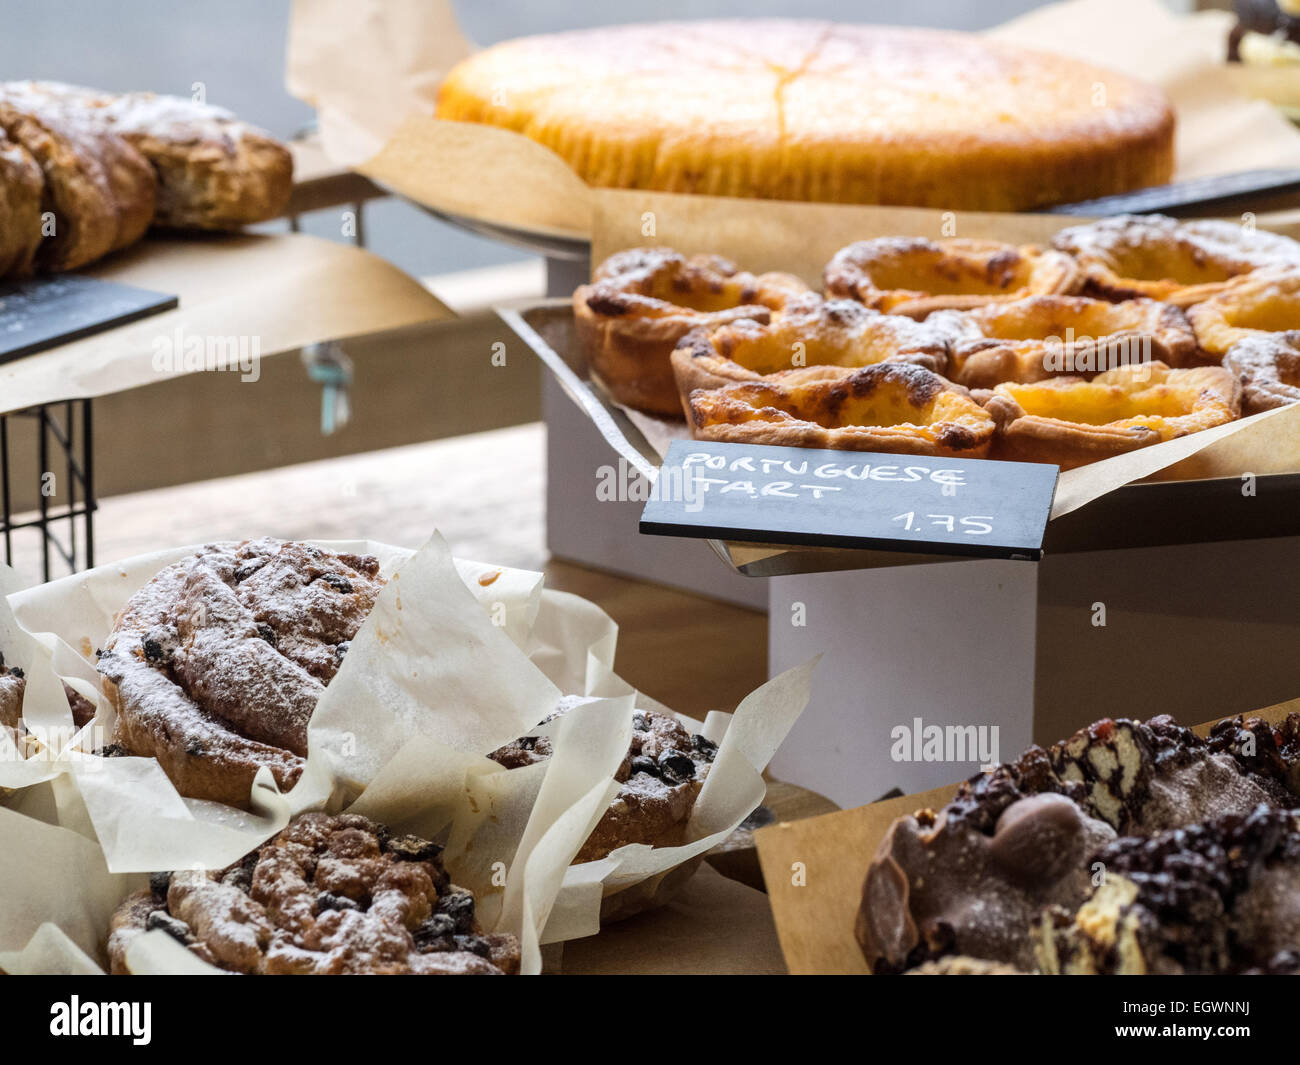 Portuguese Custard Tarts or Pastel De Nata and assorted other cakes on display at a Cambridge Cafe. Stock Photo